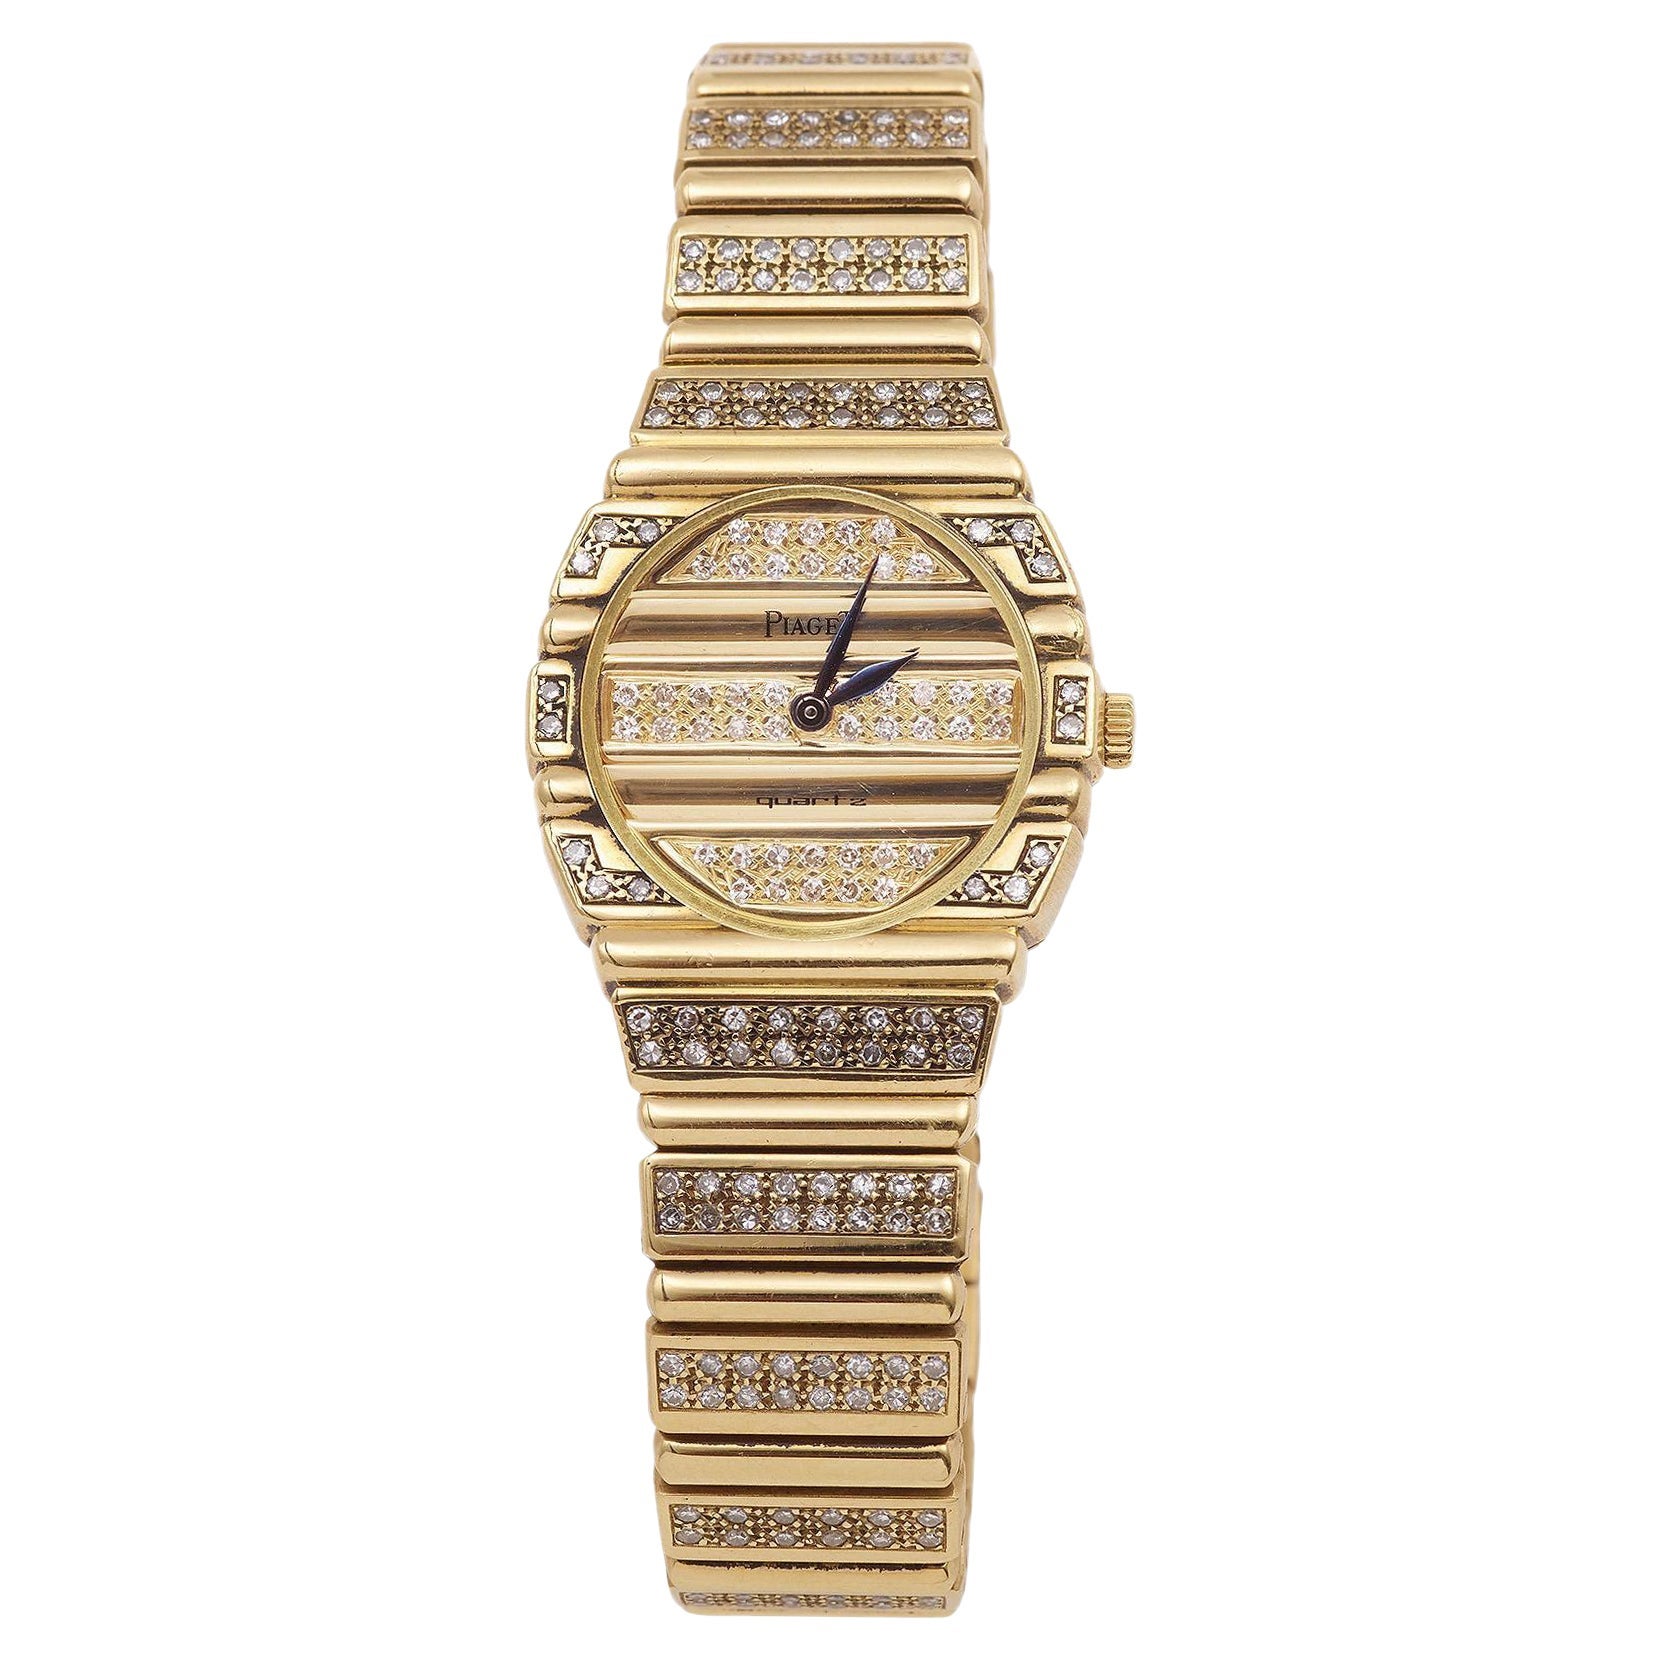 Lady Piaget "Polo" Full Diamonds 18 Carats Yellow Gold Watch For Sale